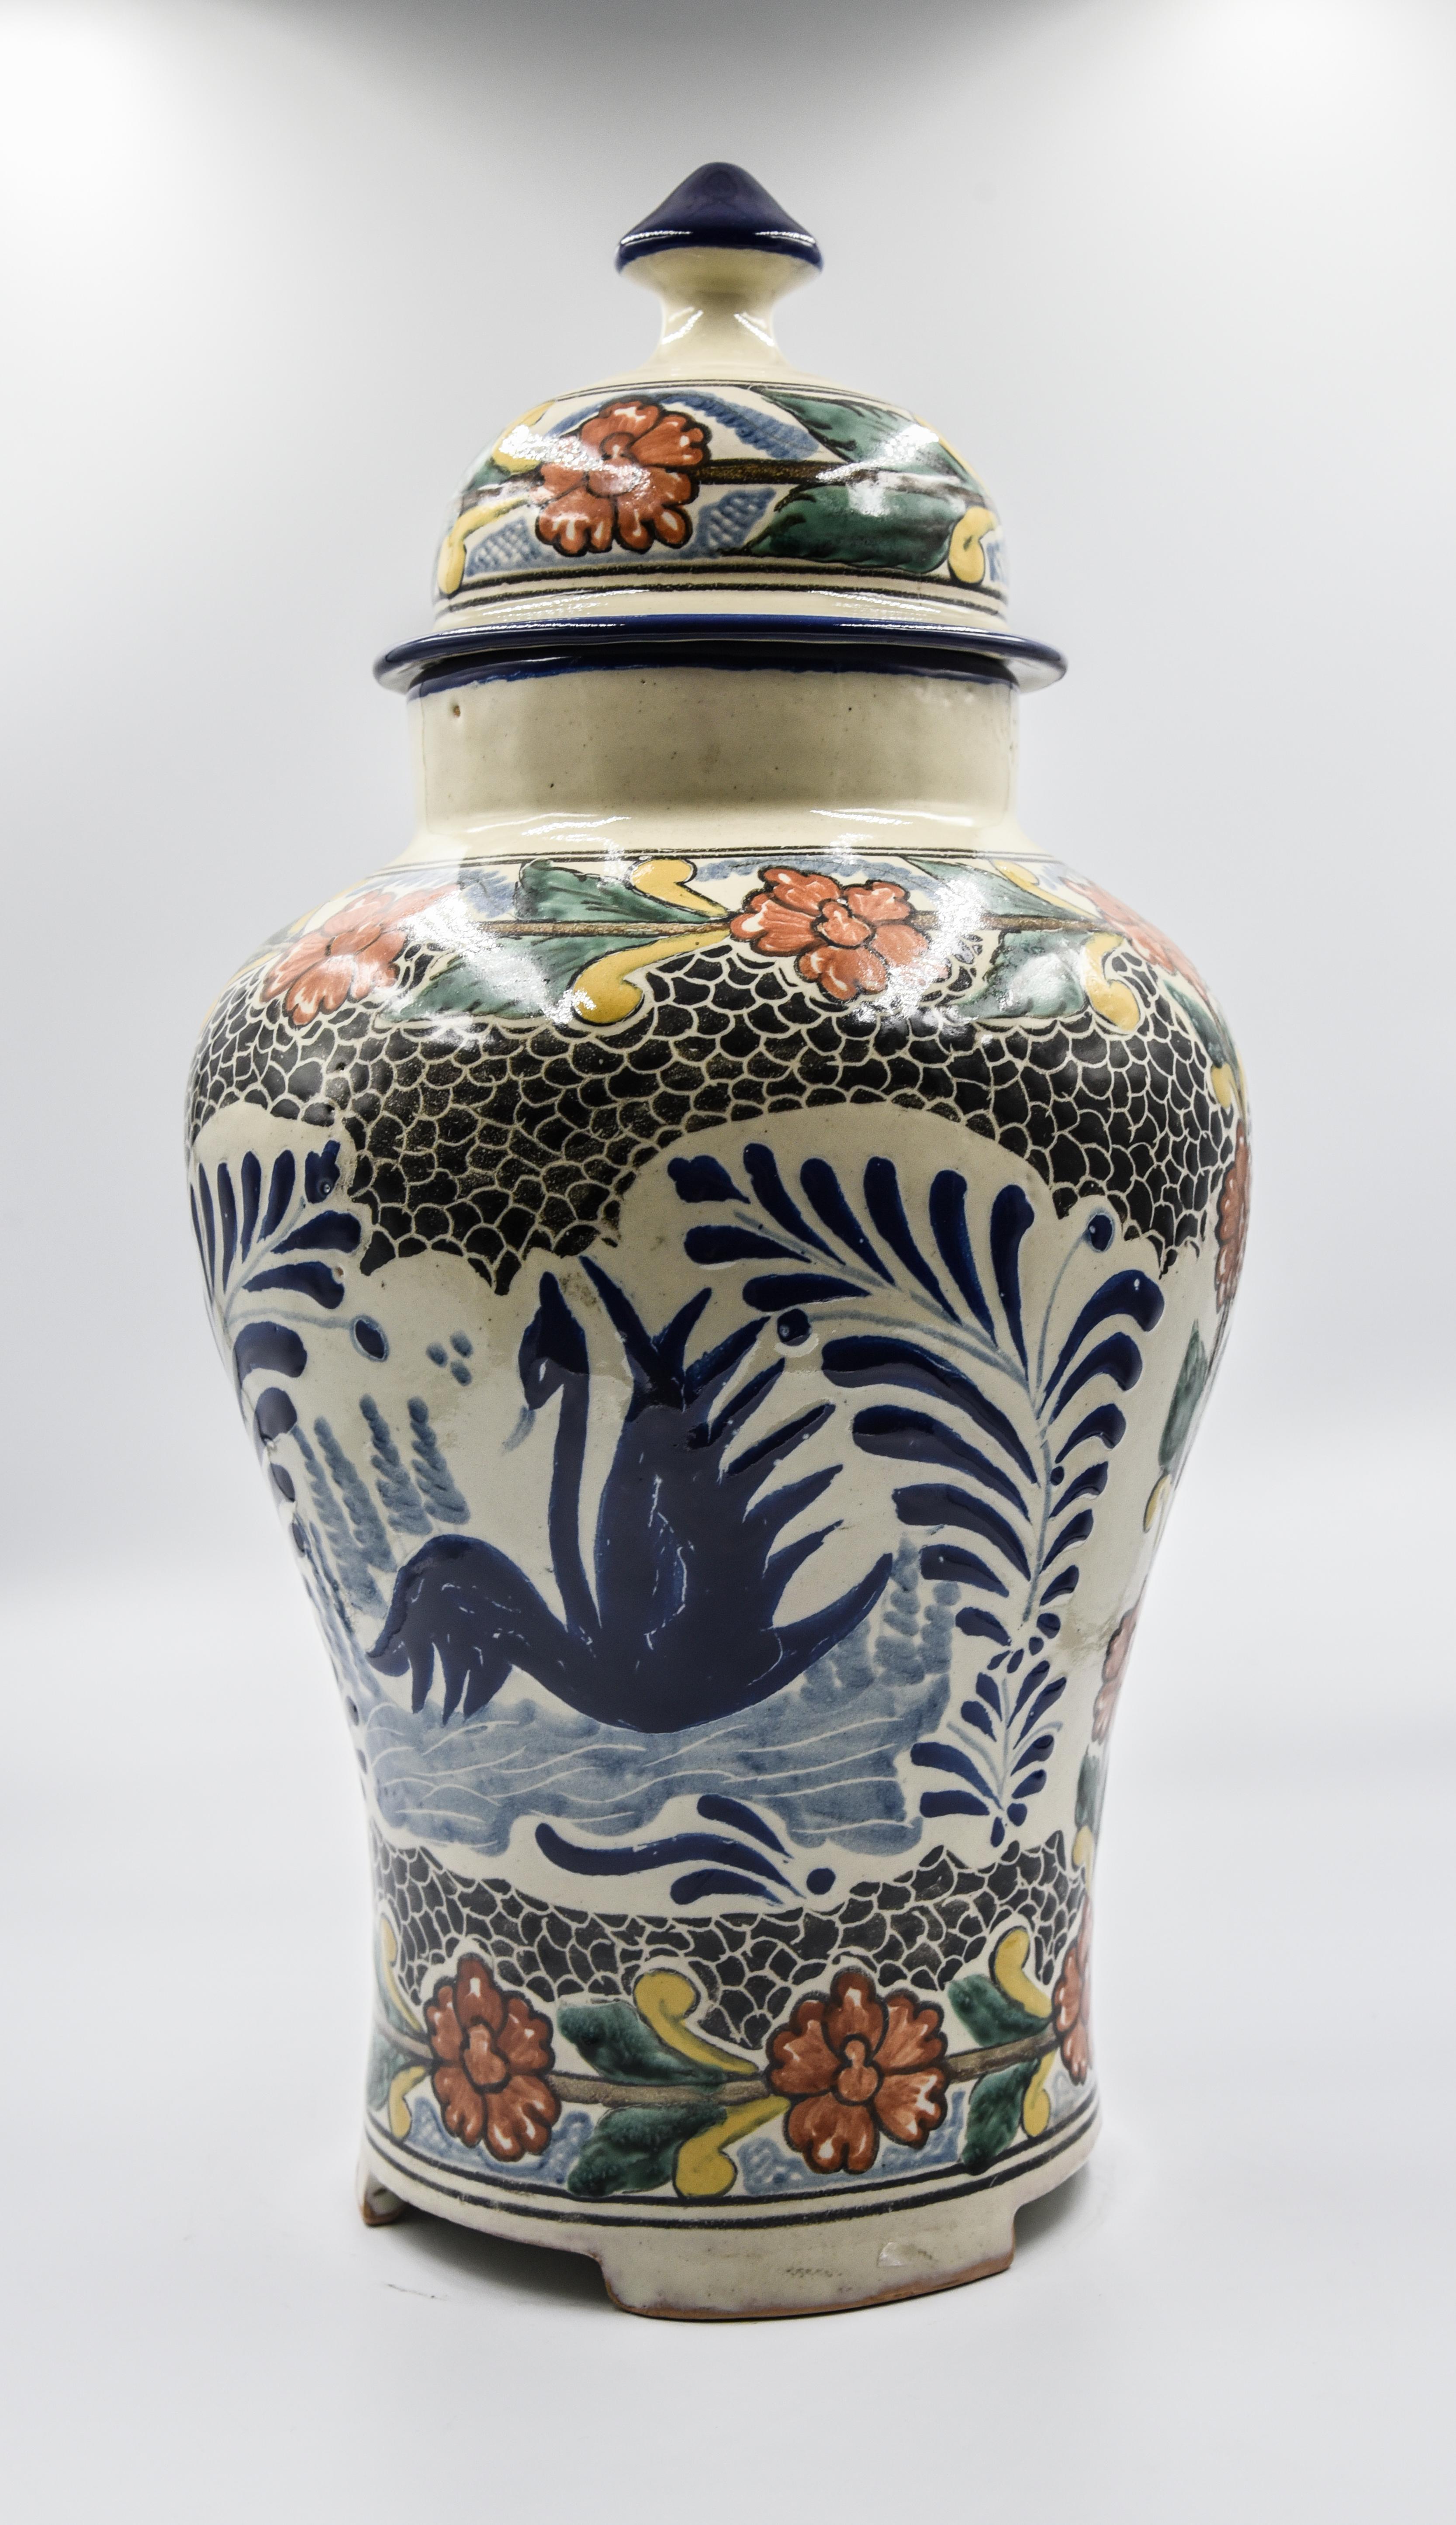 This impressive one of a kind vase is a true representation of Cesar Torres's work. This beautiful vase figure comes with a pointy lid just as a traditional Talavera vase. Its texture and design are however a mixture of colonial and contemporary